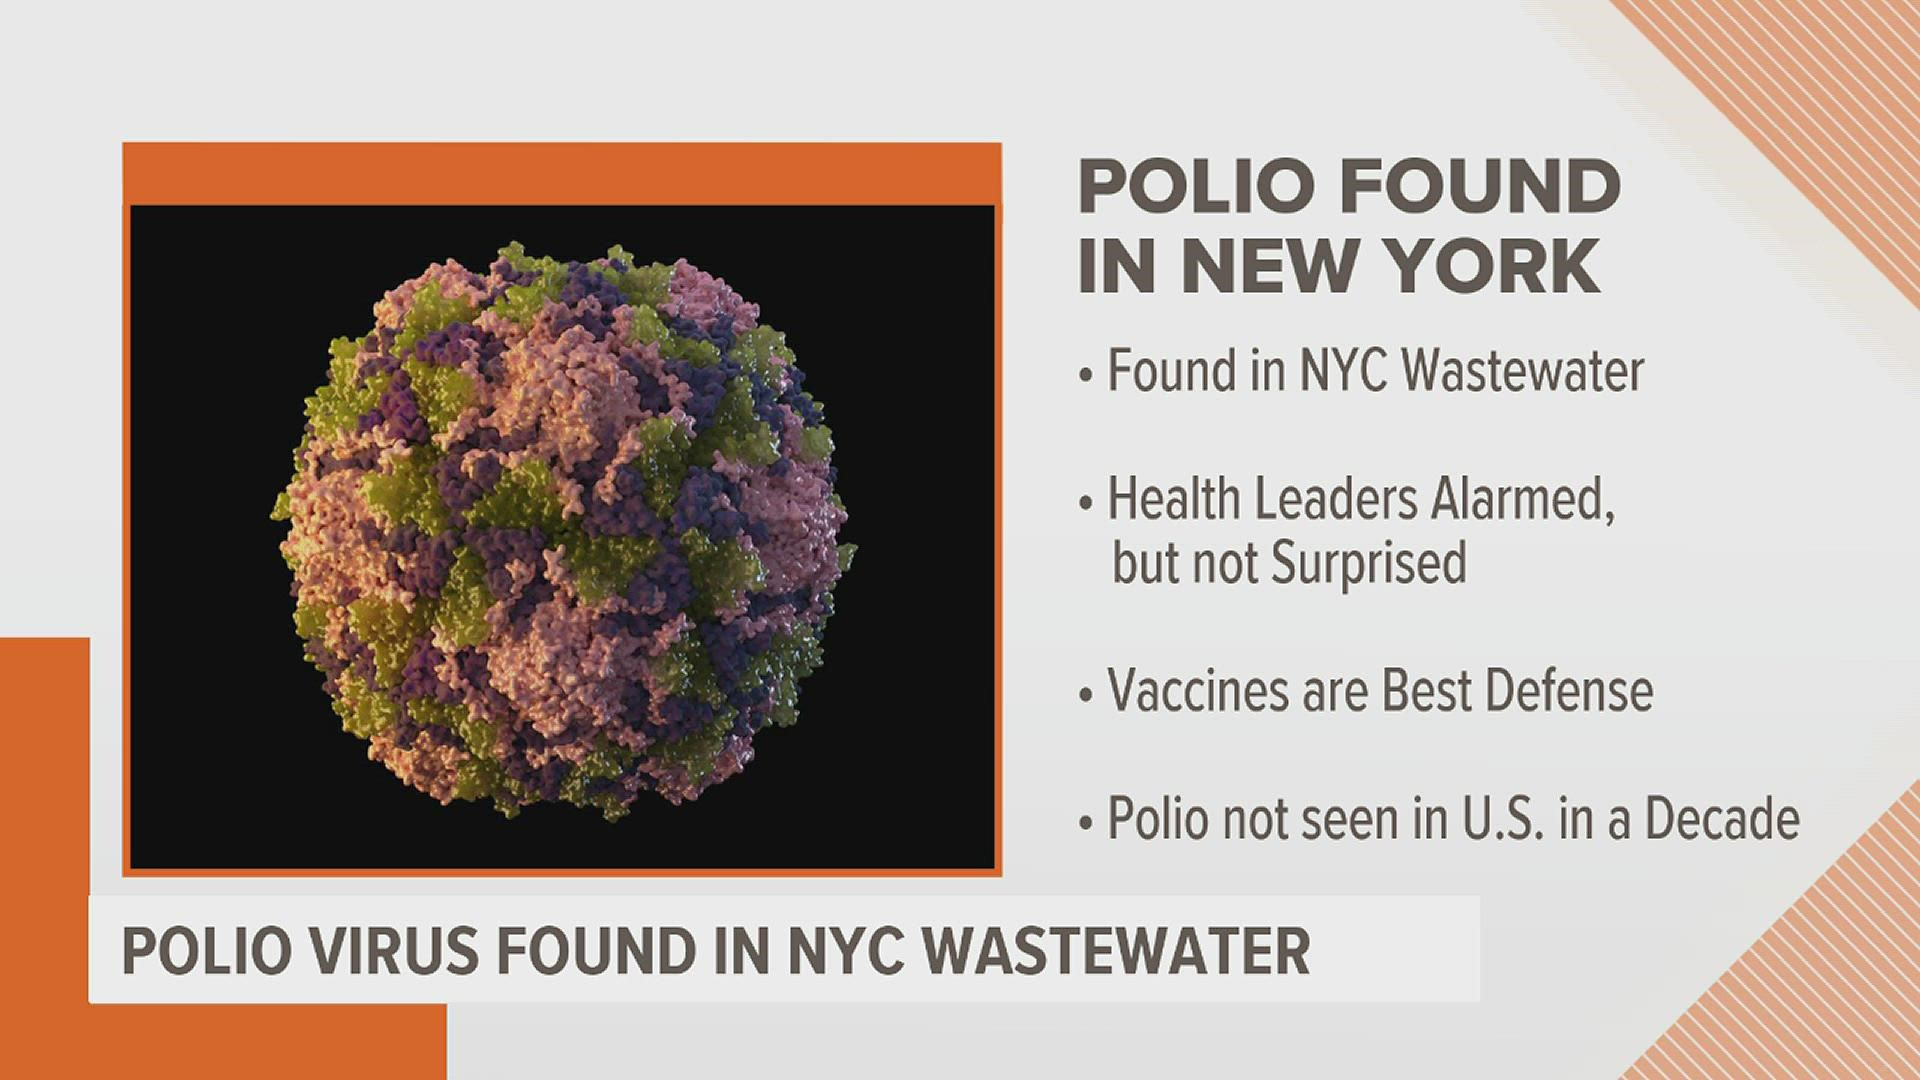 The findings suggest polio is spreading among unvaccinated people. Health officials say the best defense against the virus is to get vaccinated.